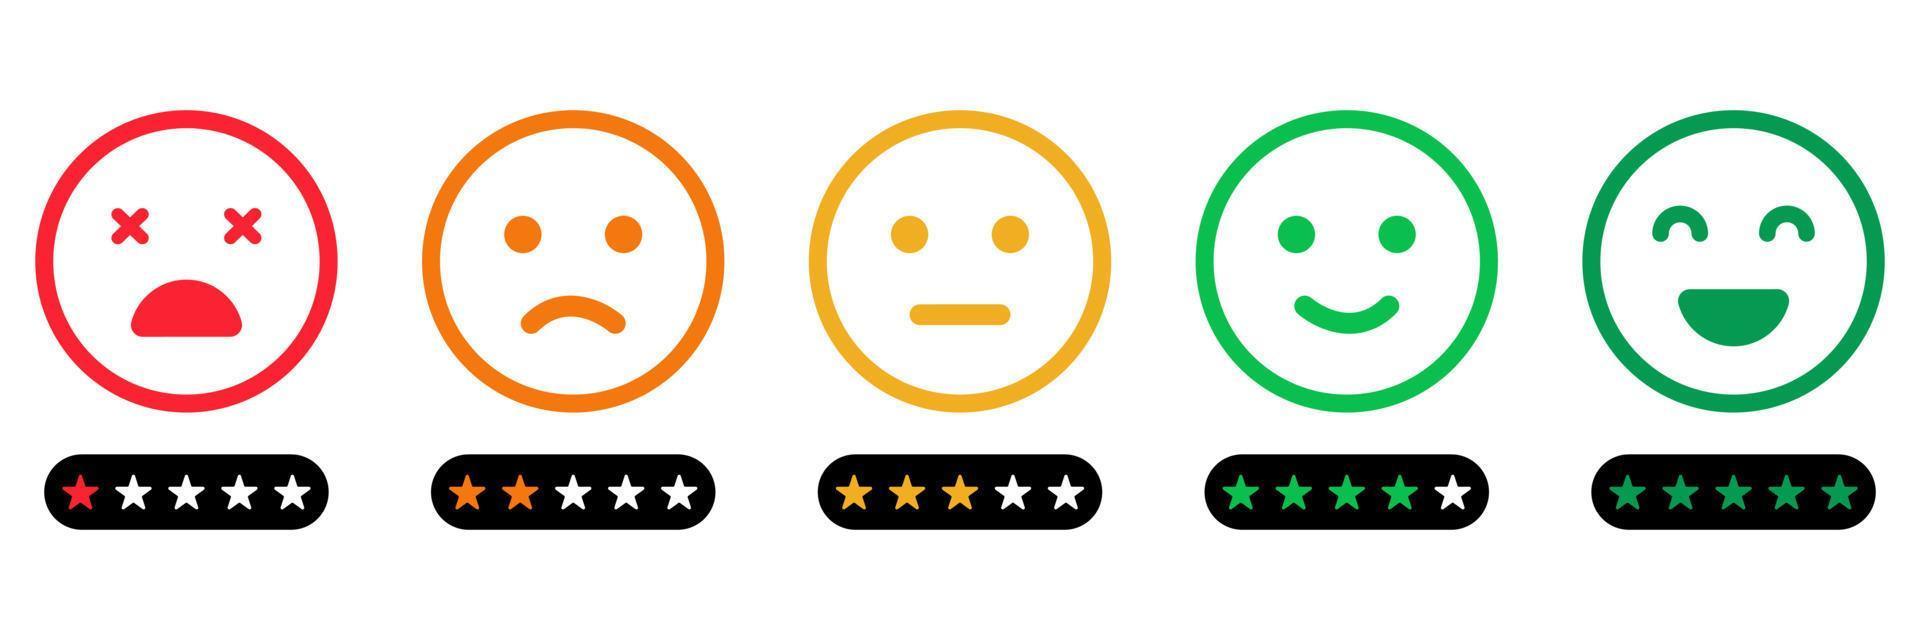 Emoji Feedback Scale with Stars Line Icon. Customers Mood from Happy Good Face to Angry and Sad Concept. Emoticon Feedback. Level Survey of Customer Satisfaction. Isolated Vector Illustration.